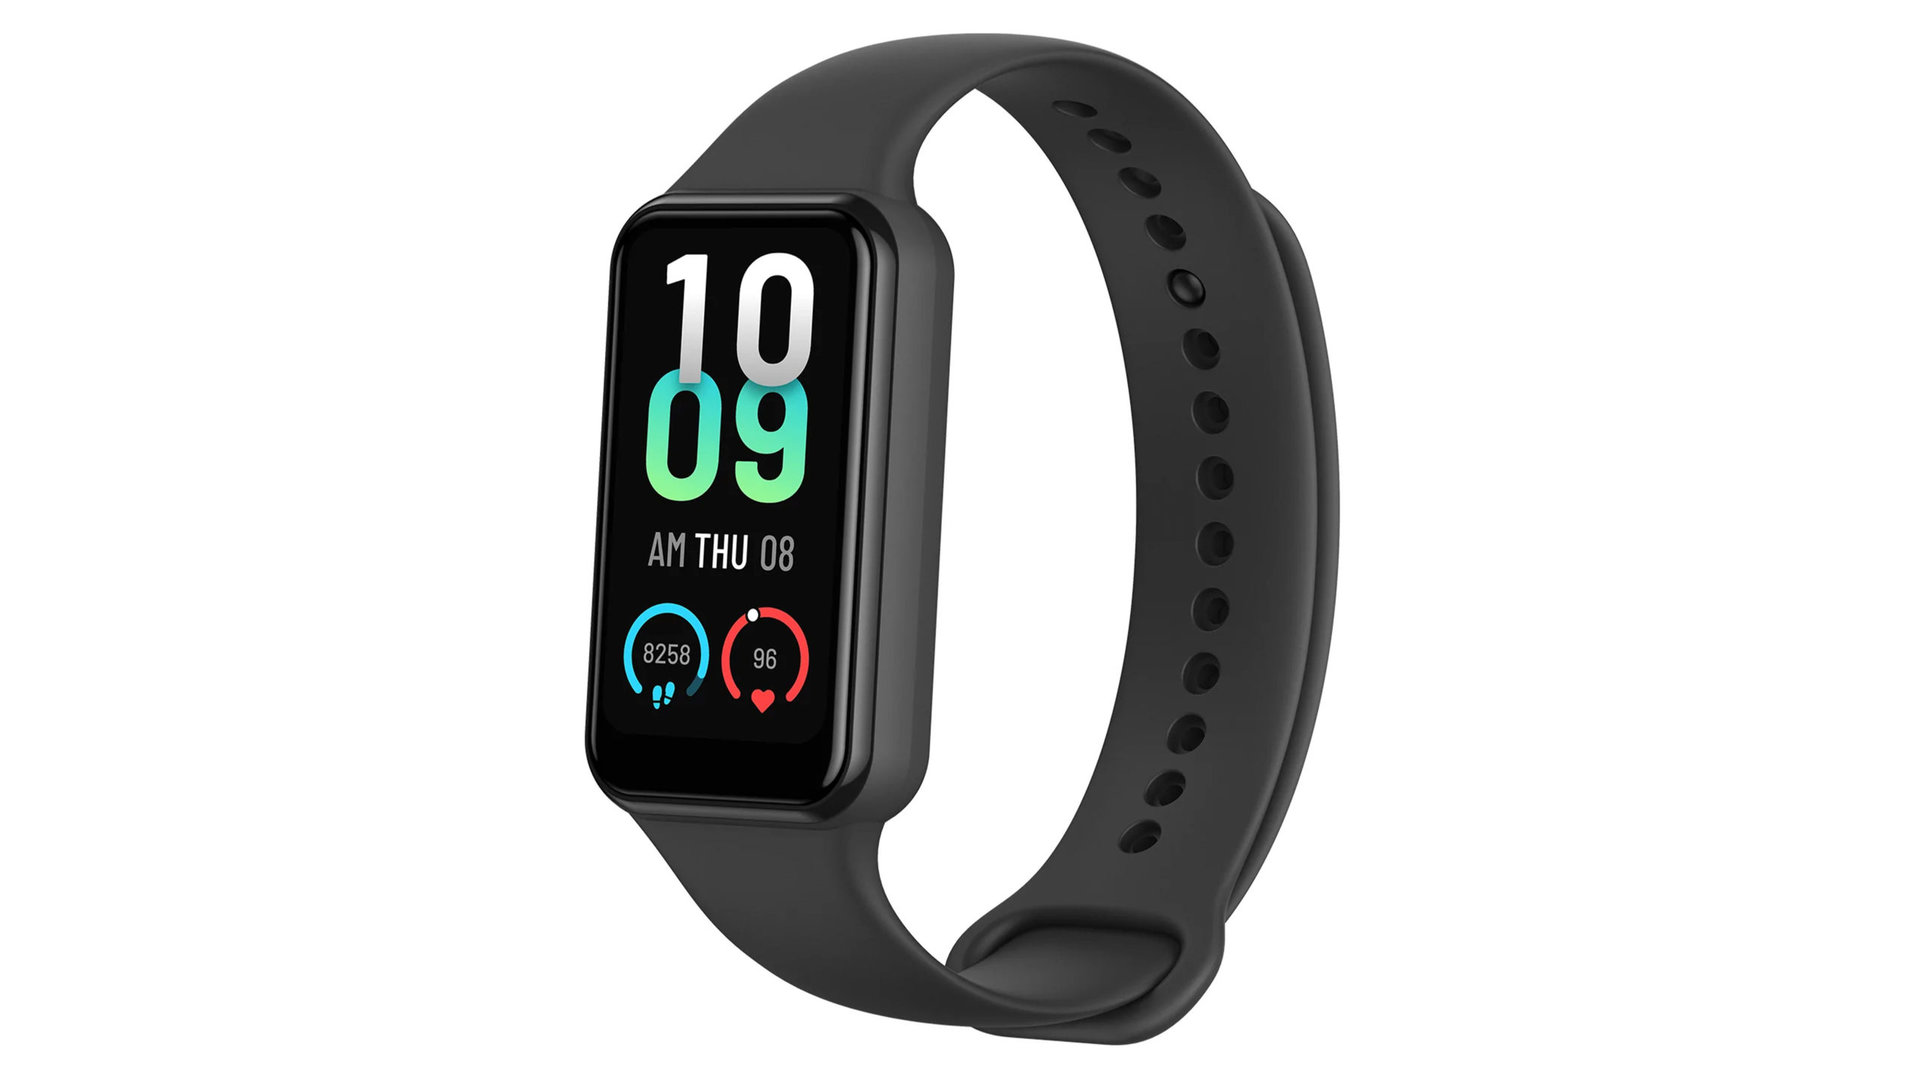 The Amazfit Band 7 features a large display and adequate health and fitness tracking.